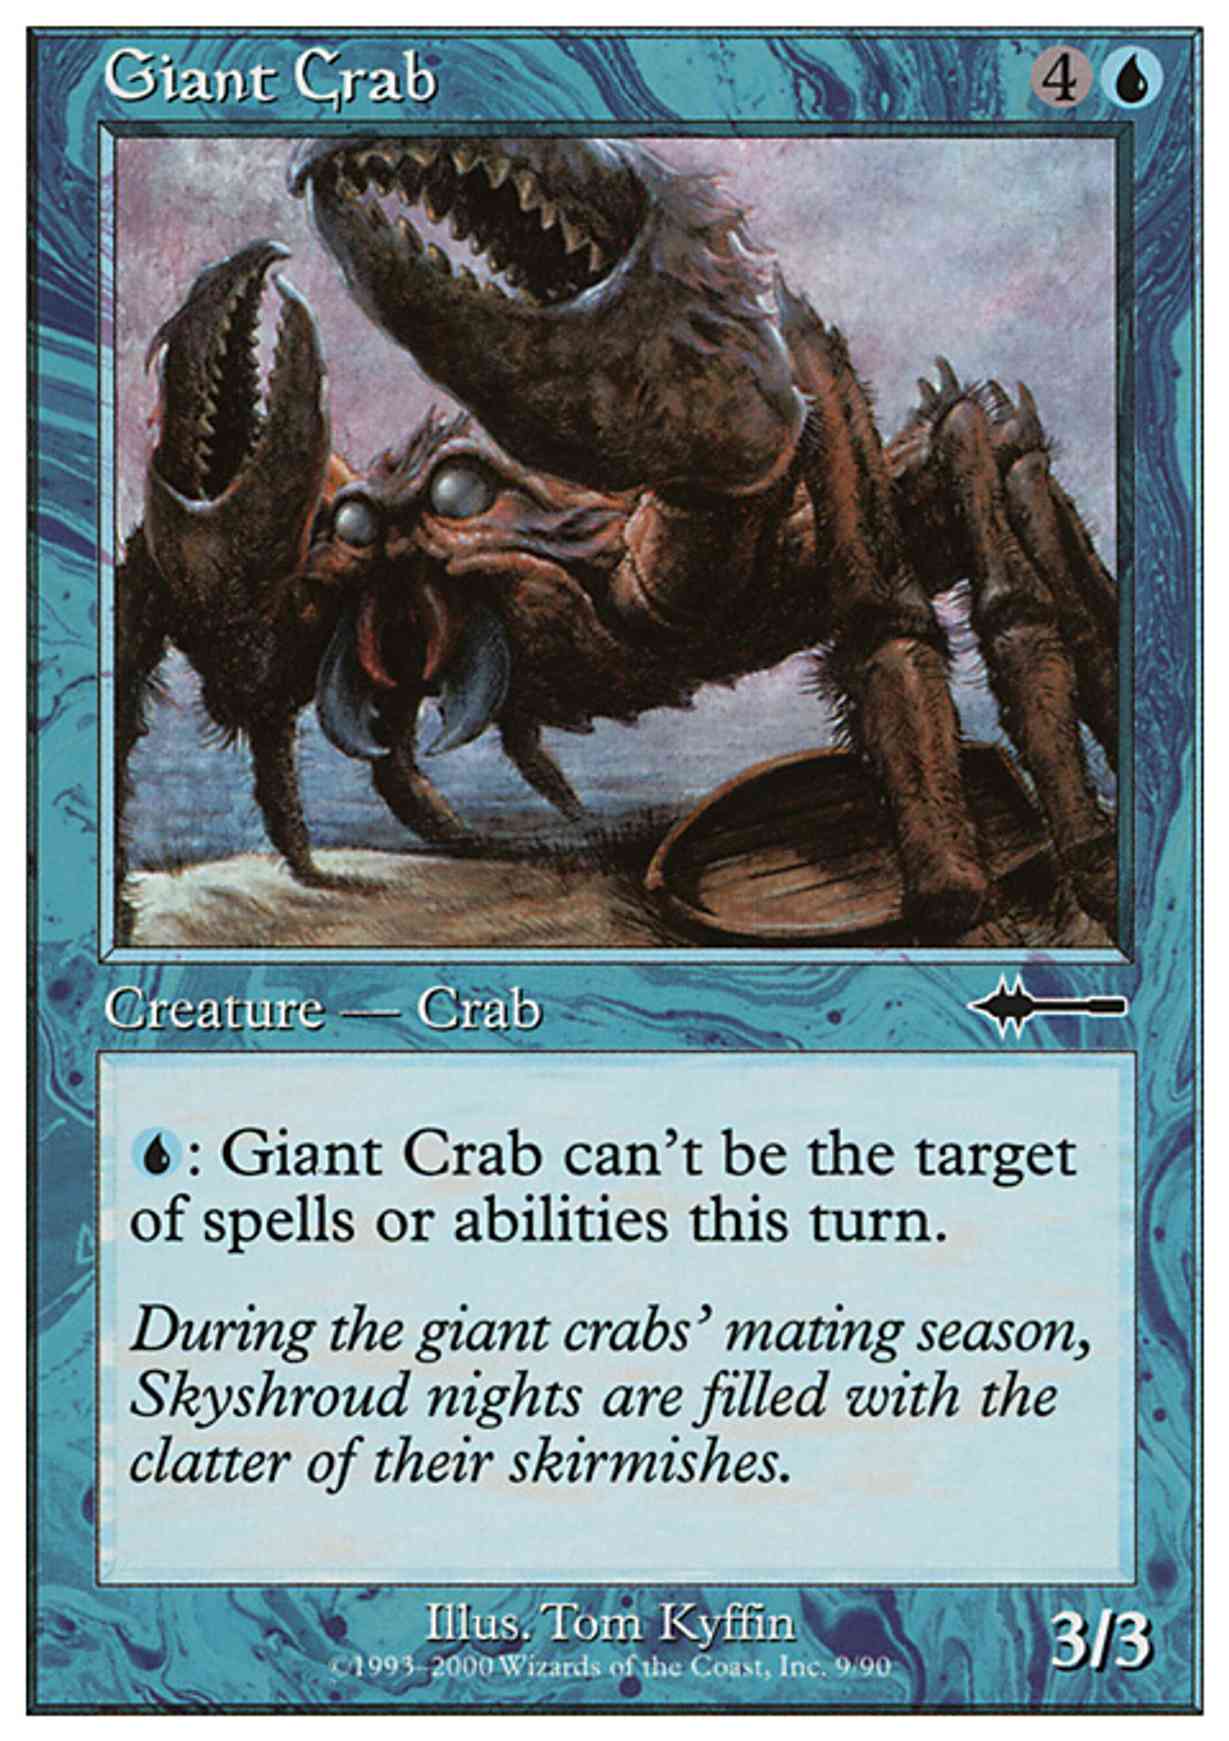 Giant Crab magic card front